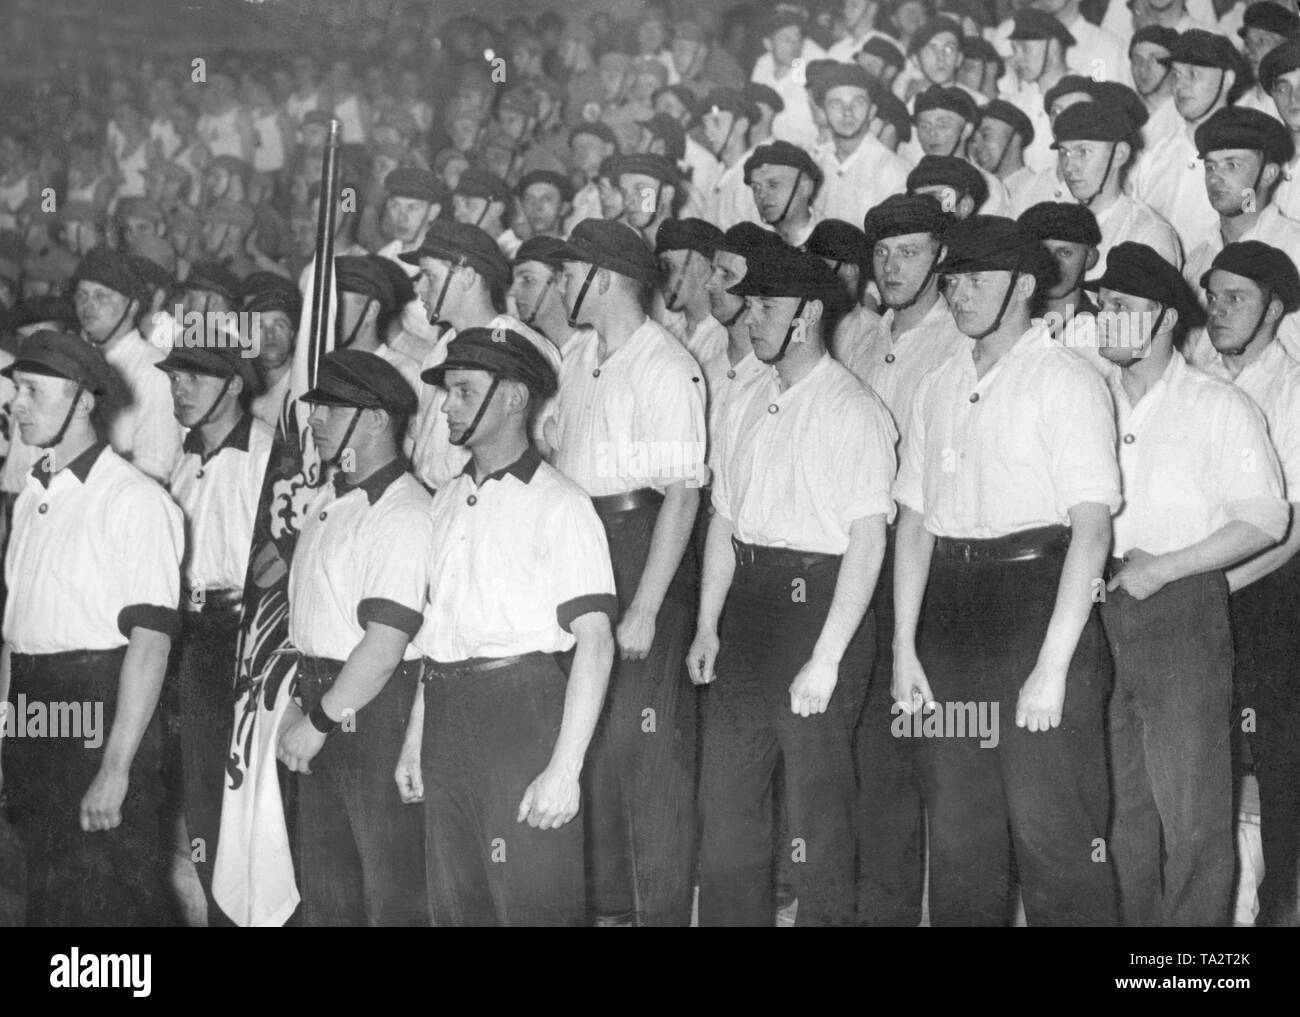 Members of an SA-Sturm have line up during a mass event of the NSDAP. They are wearing uniform white shirts and caps. Stock Photo